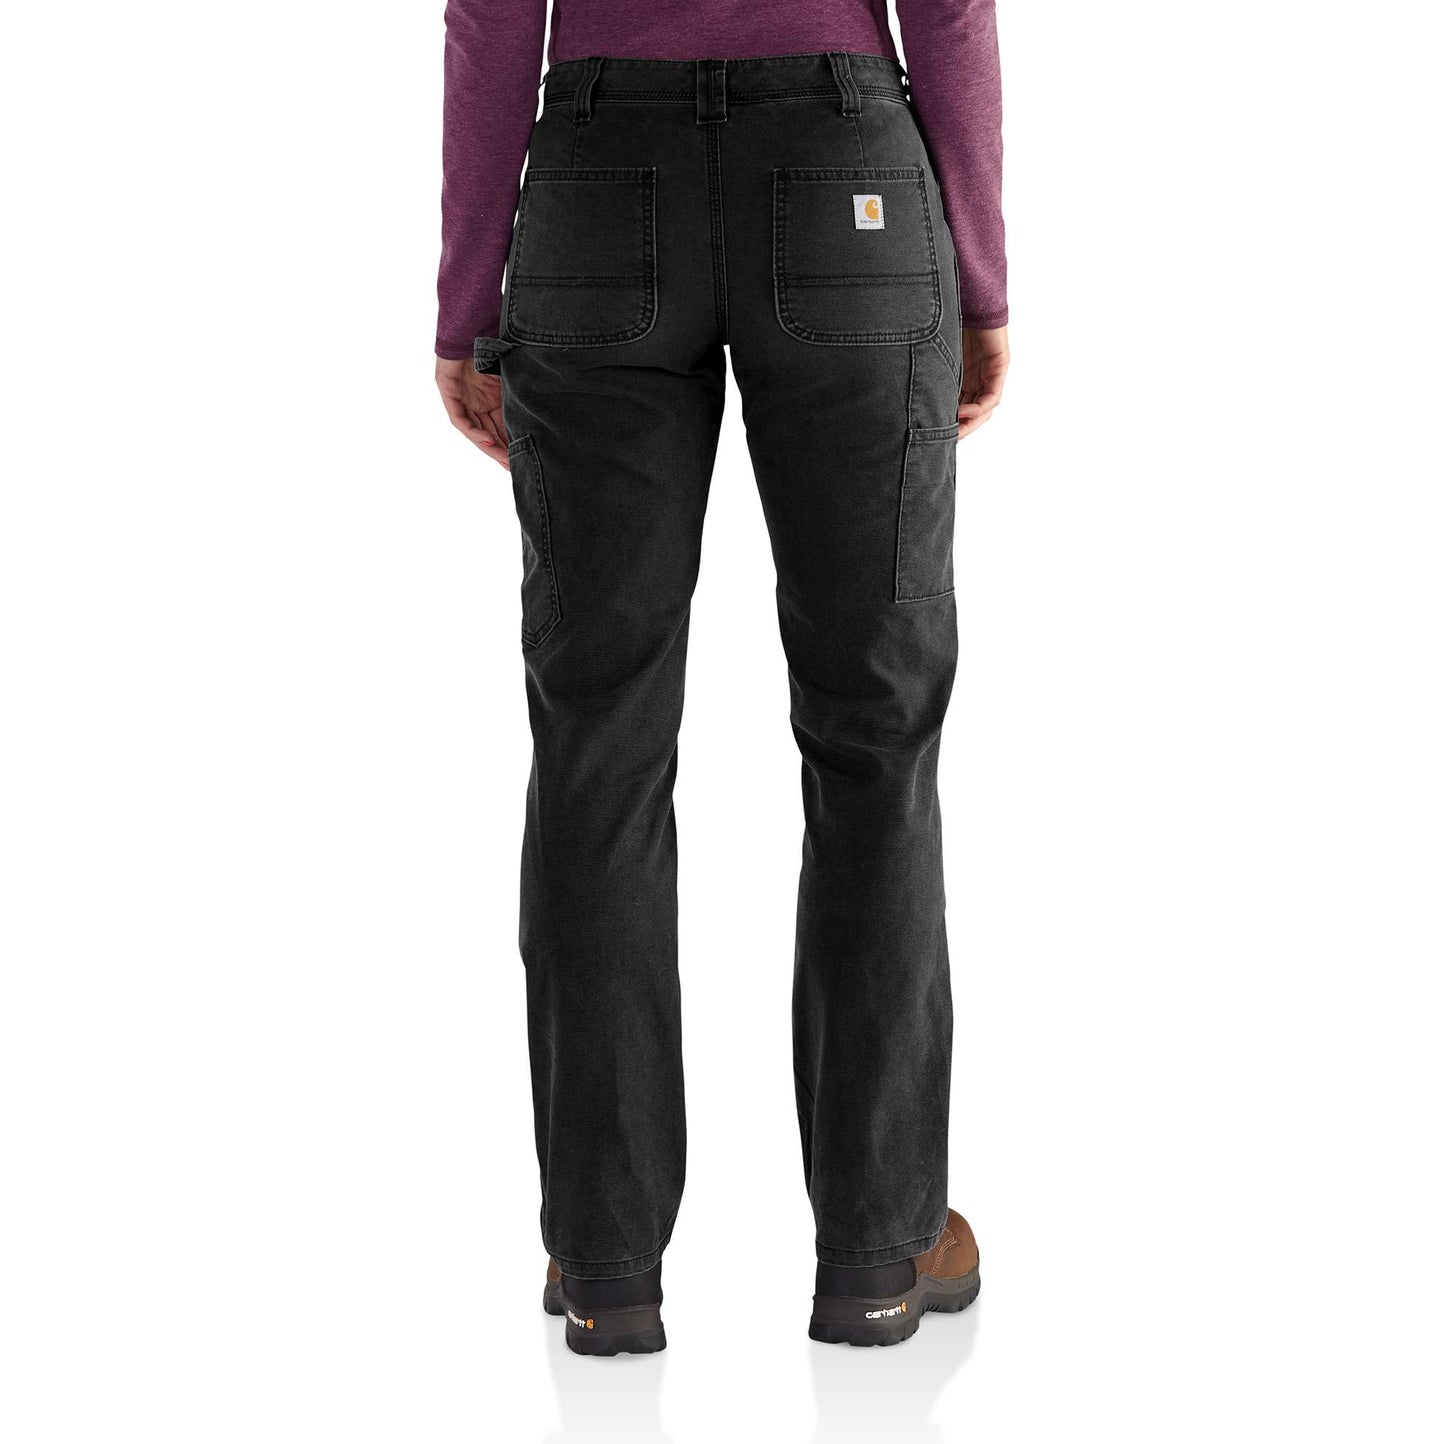 Carhartt Women's Rugged Flex Loose Fit Canvas Double Front Work Pant Sizes  2-18